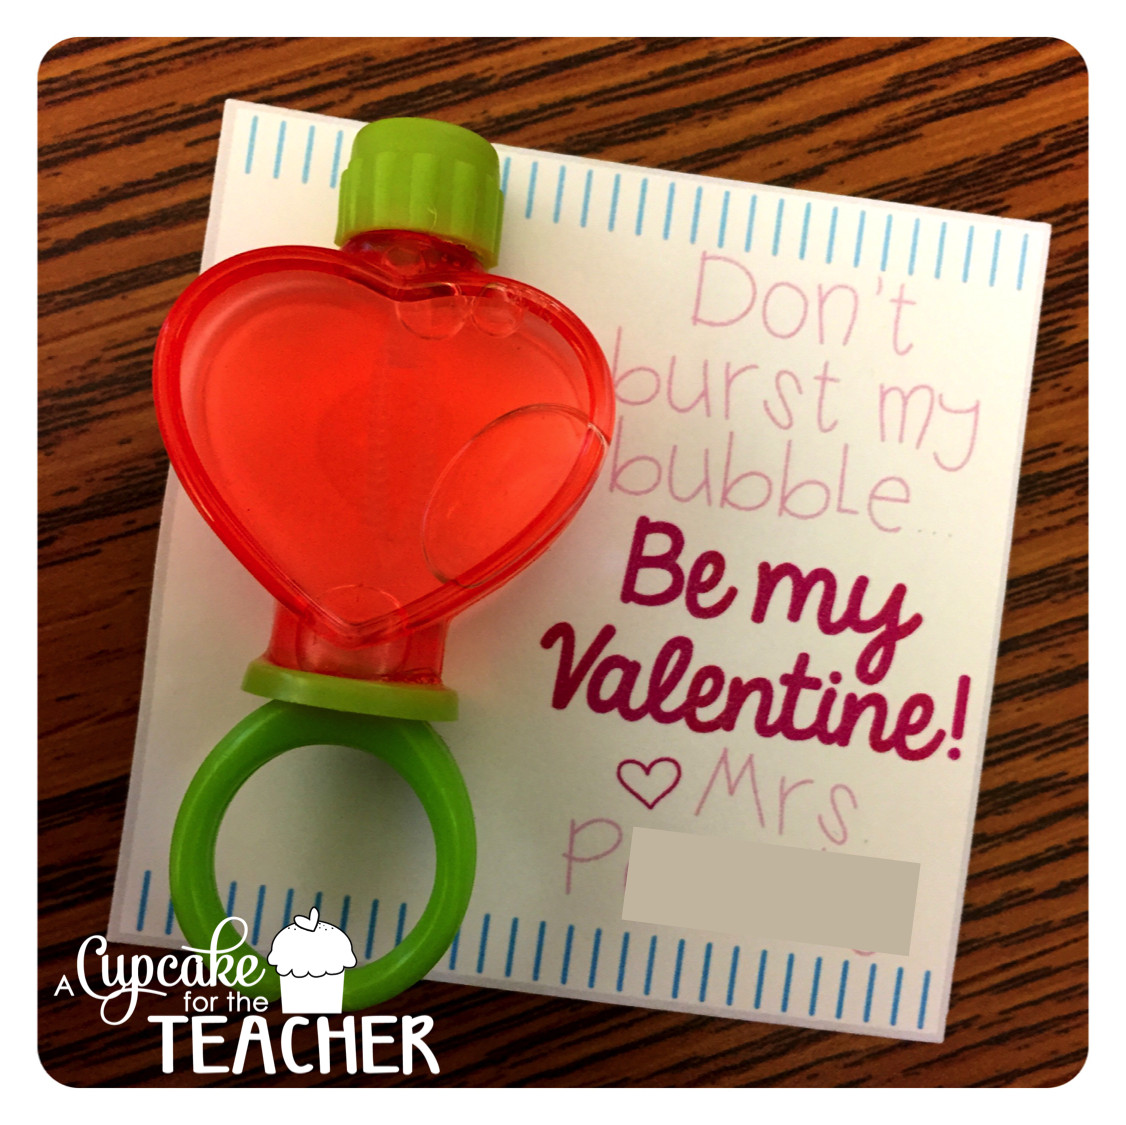 Valentine Day Gift Ideas For Coworkers
 Valentine Gift Ideas Coworkers Students Parents A